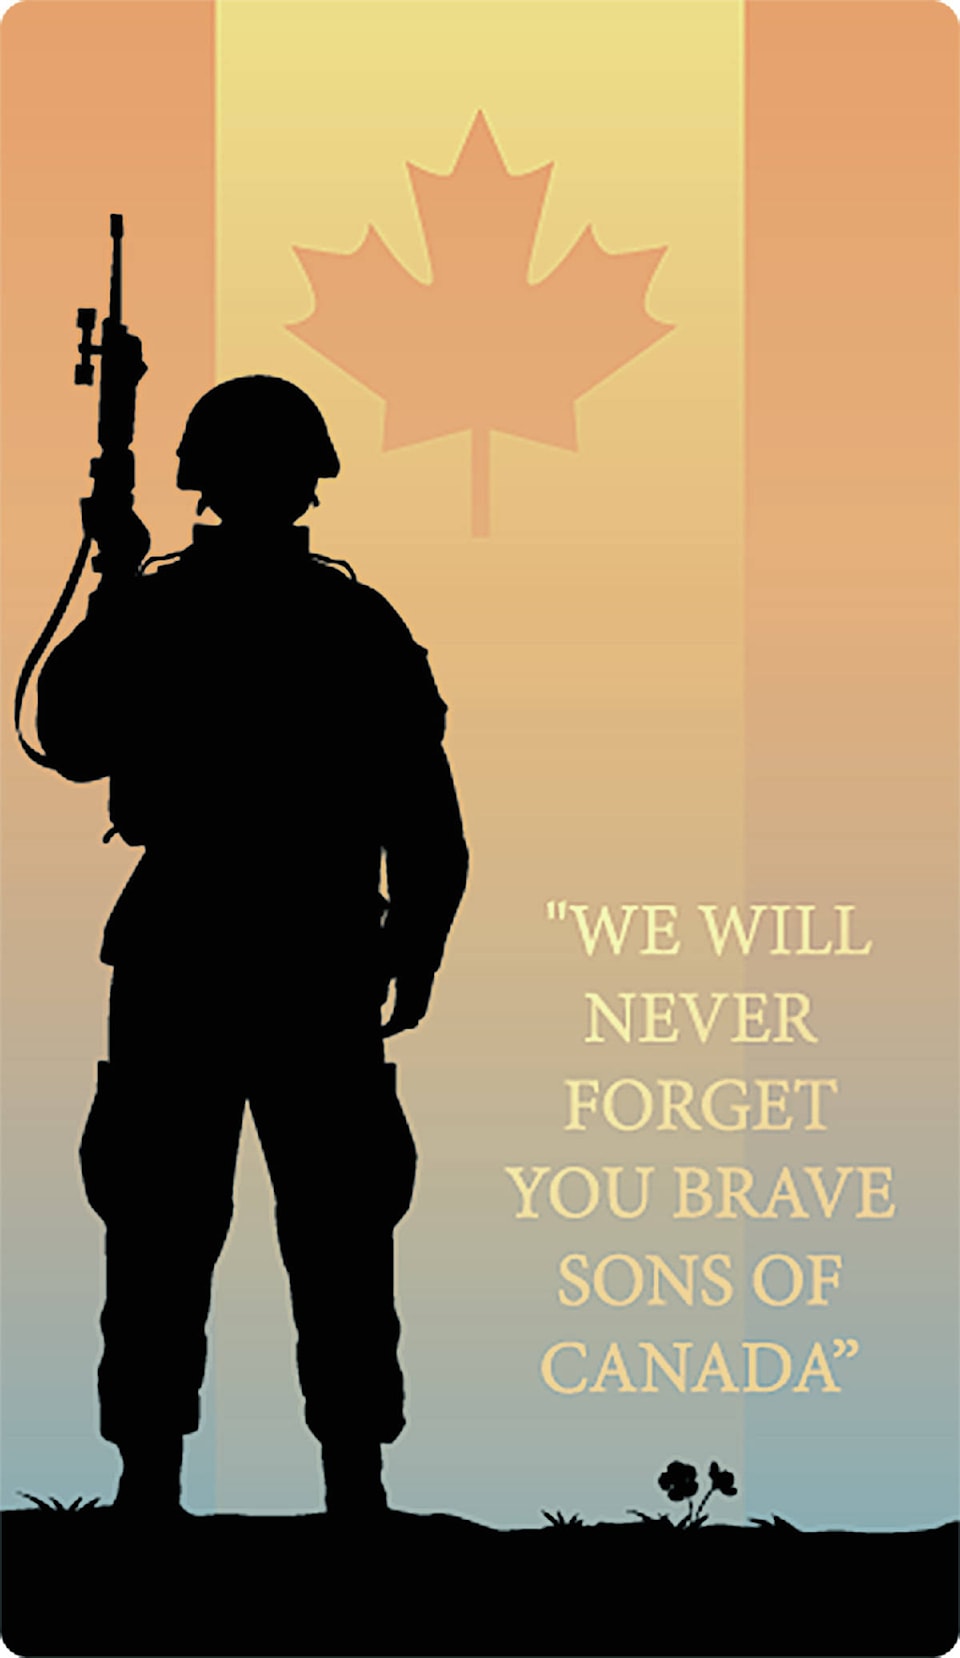 19321418_web1_Remembrance-Day-image